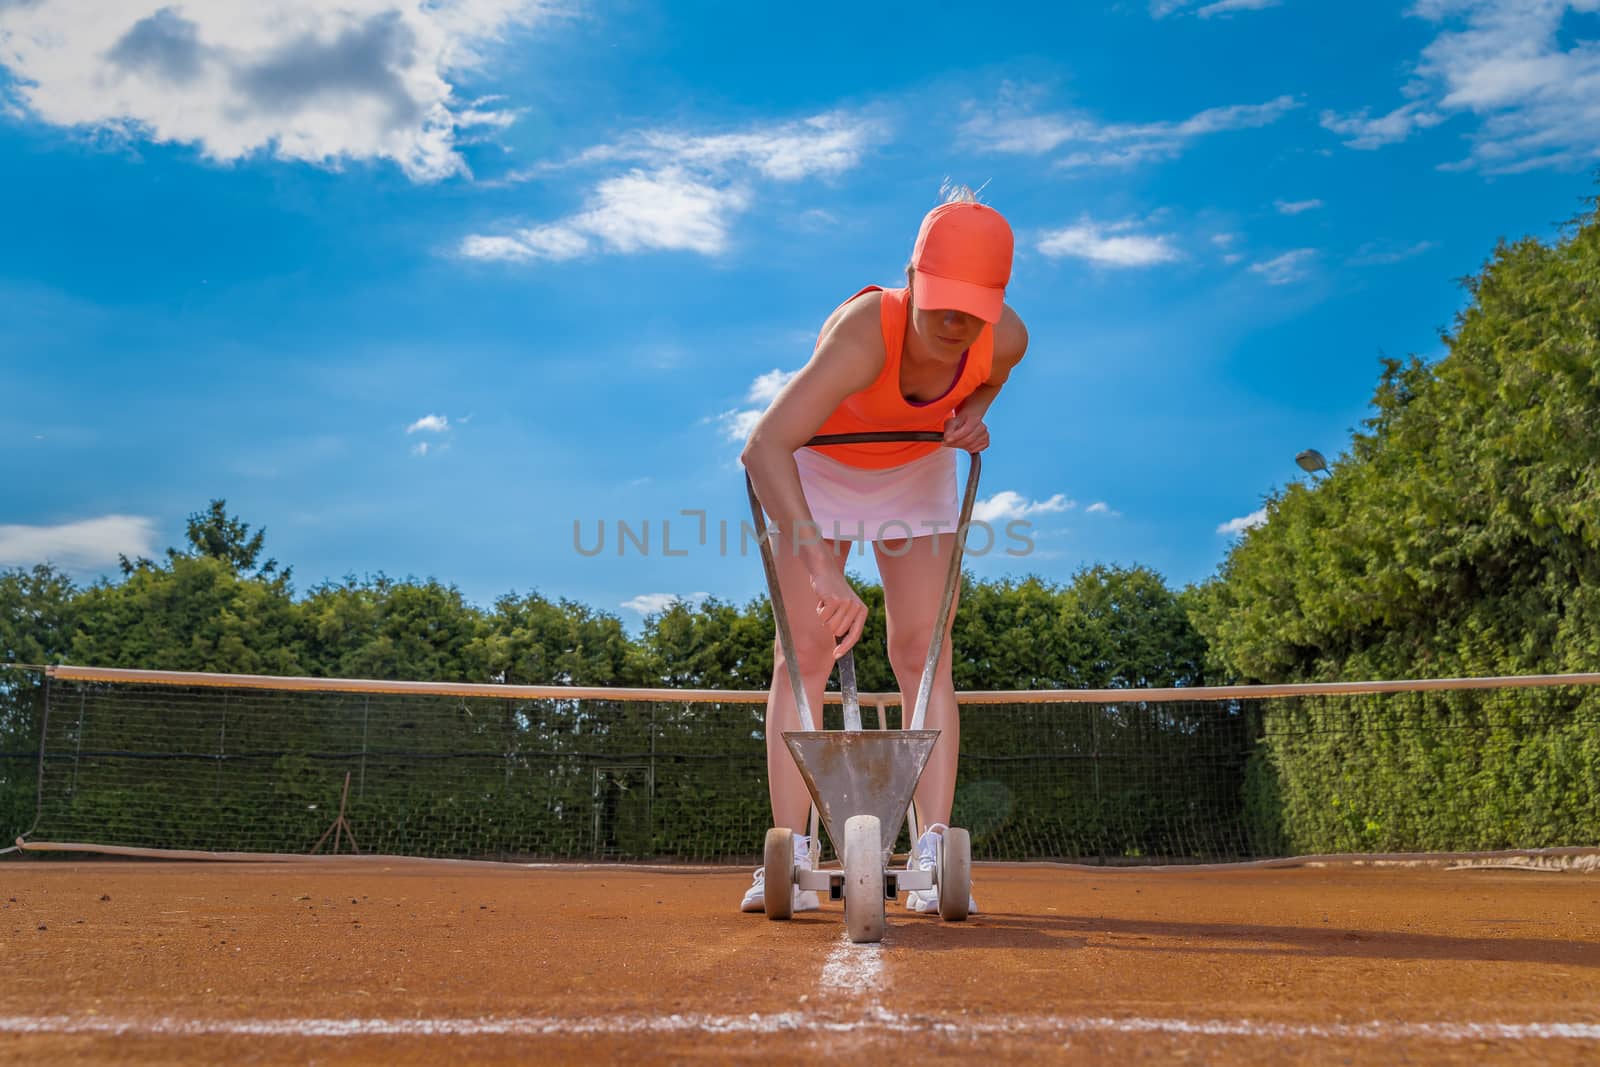 drawing white lines with lime. maintenance and repair of tennis courts